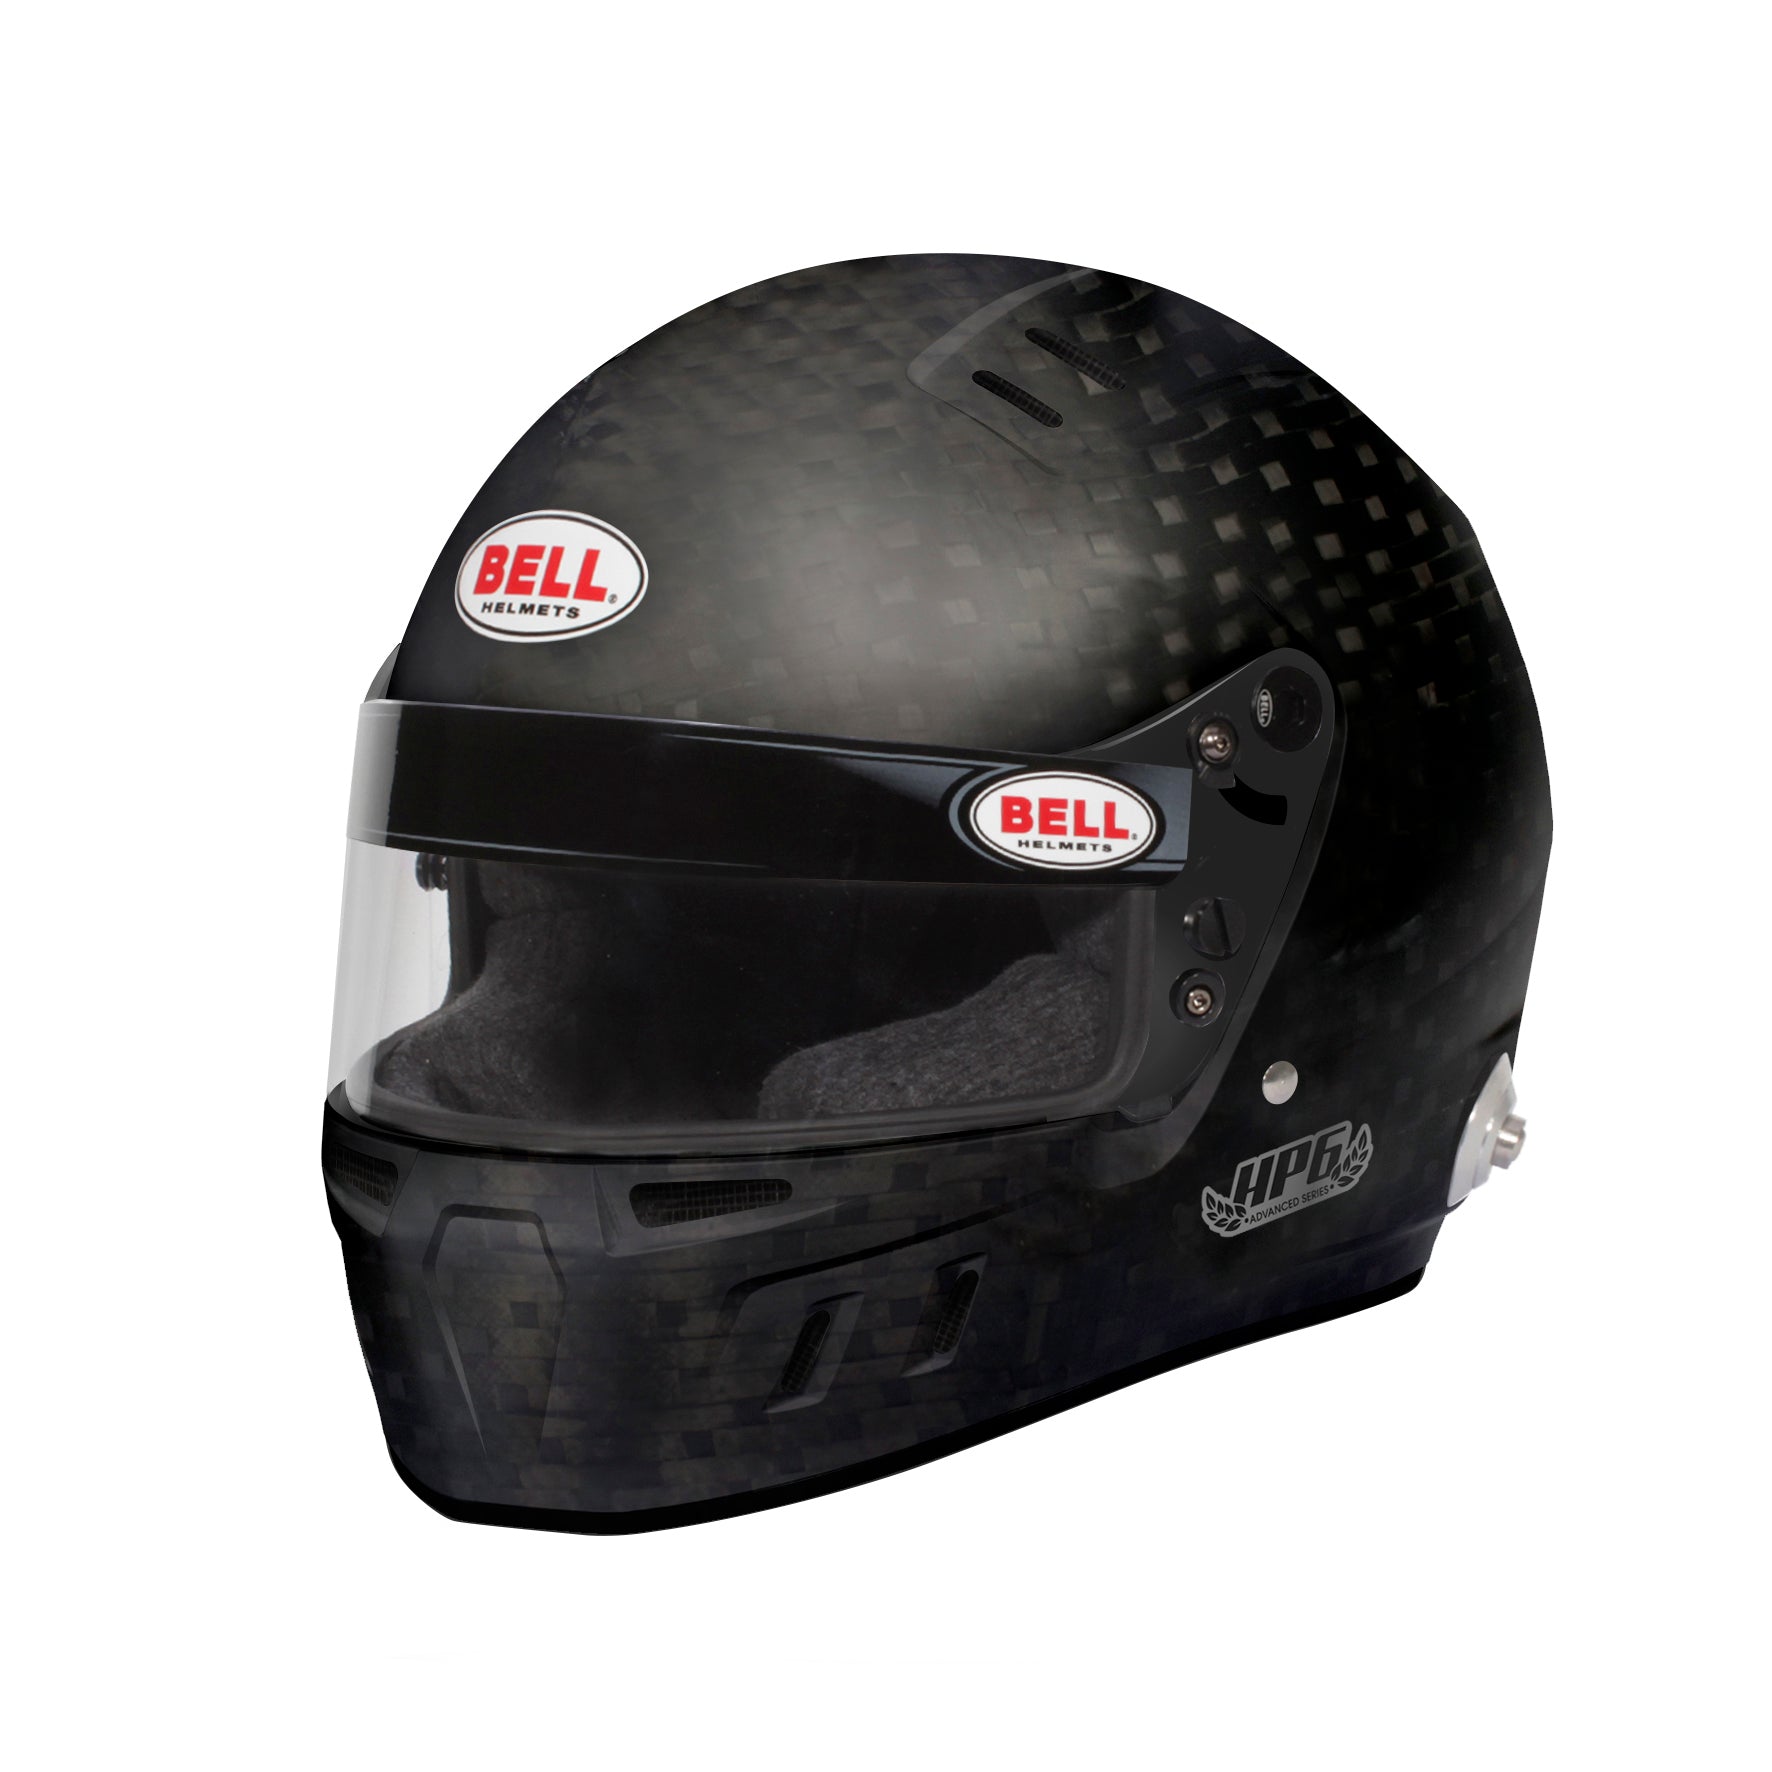 BELL 1140008 HP6 Racing helmet full-face, HANS, FIA8860-2018, carbon, size 61 (7 5/8) Photo-0 